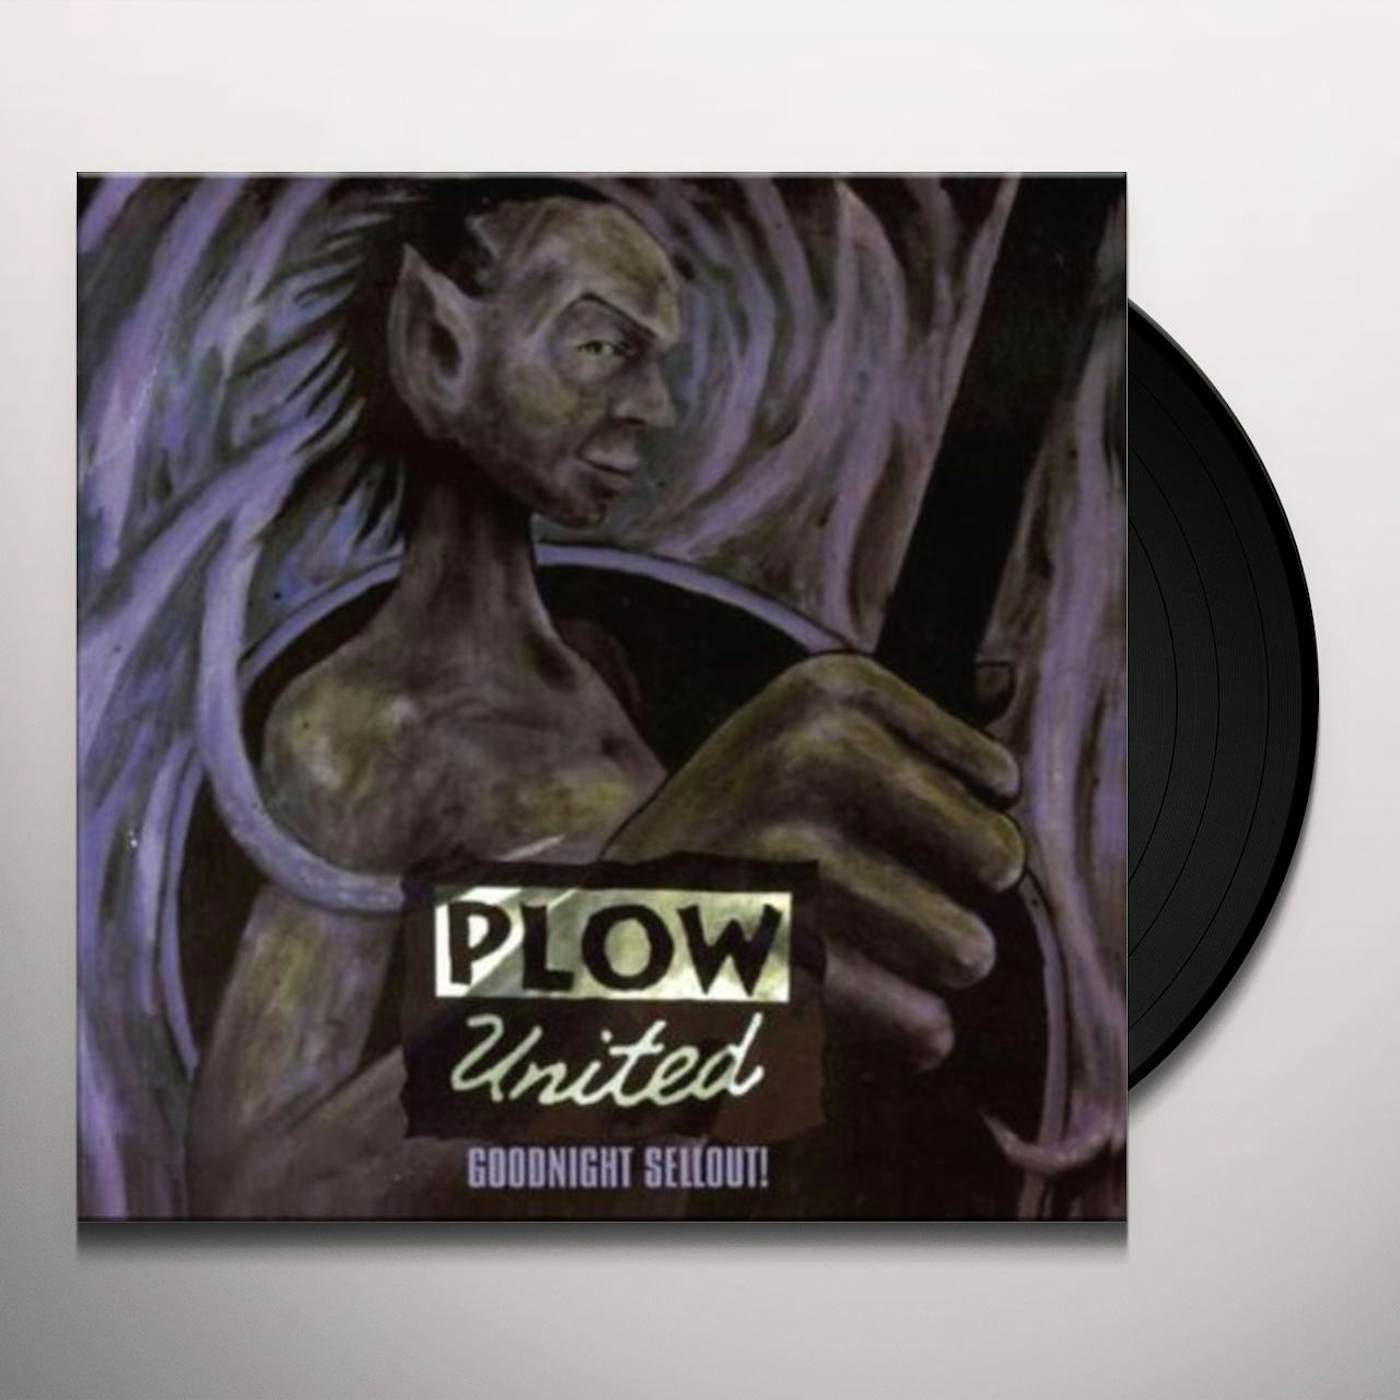 Plow United GOOD NIGHT SELLOUT Vinyl Record